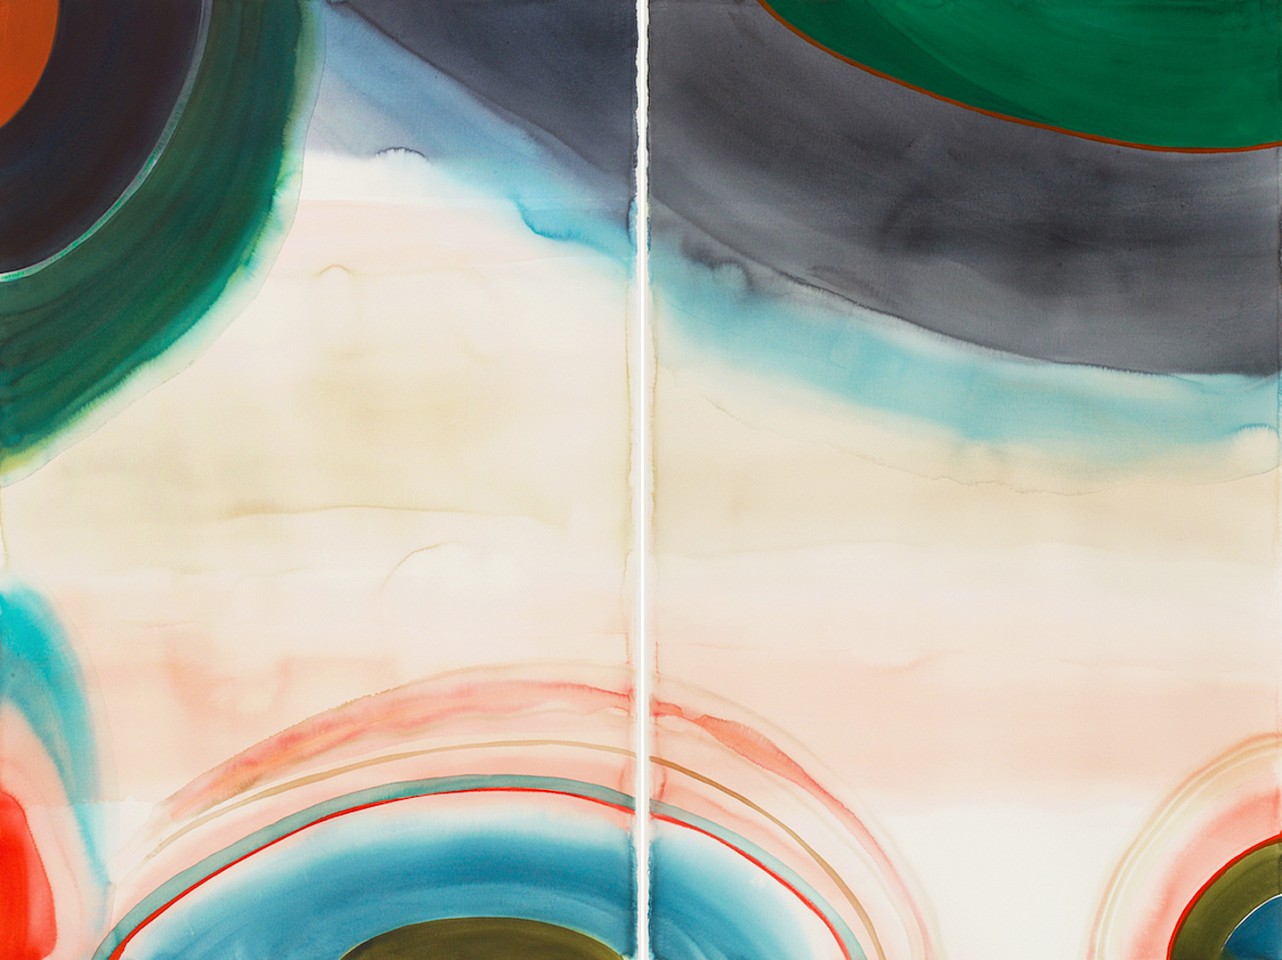 Shawn Dulaney
Boundary V, 2024
DULAN1181
watercolor on paper, 60 x 80 inches